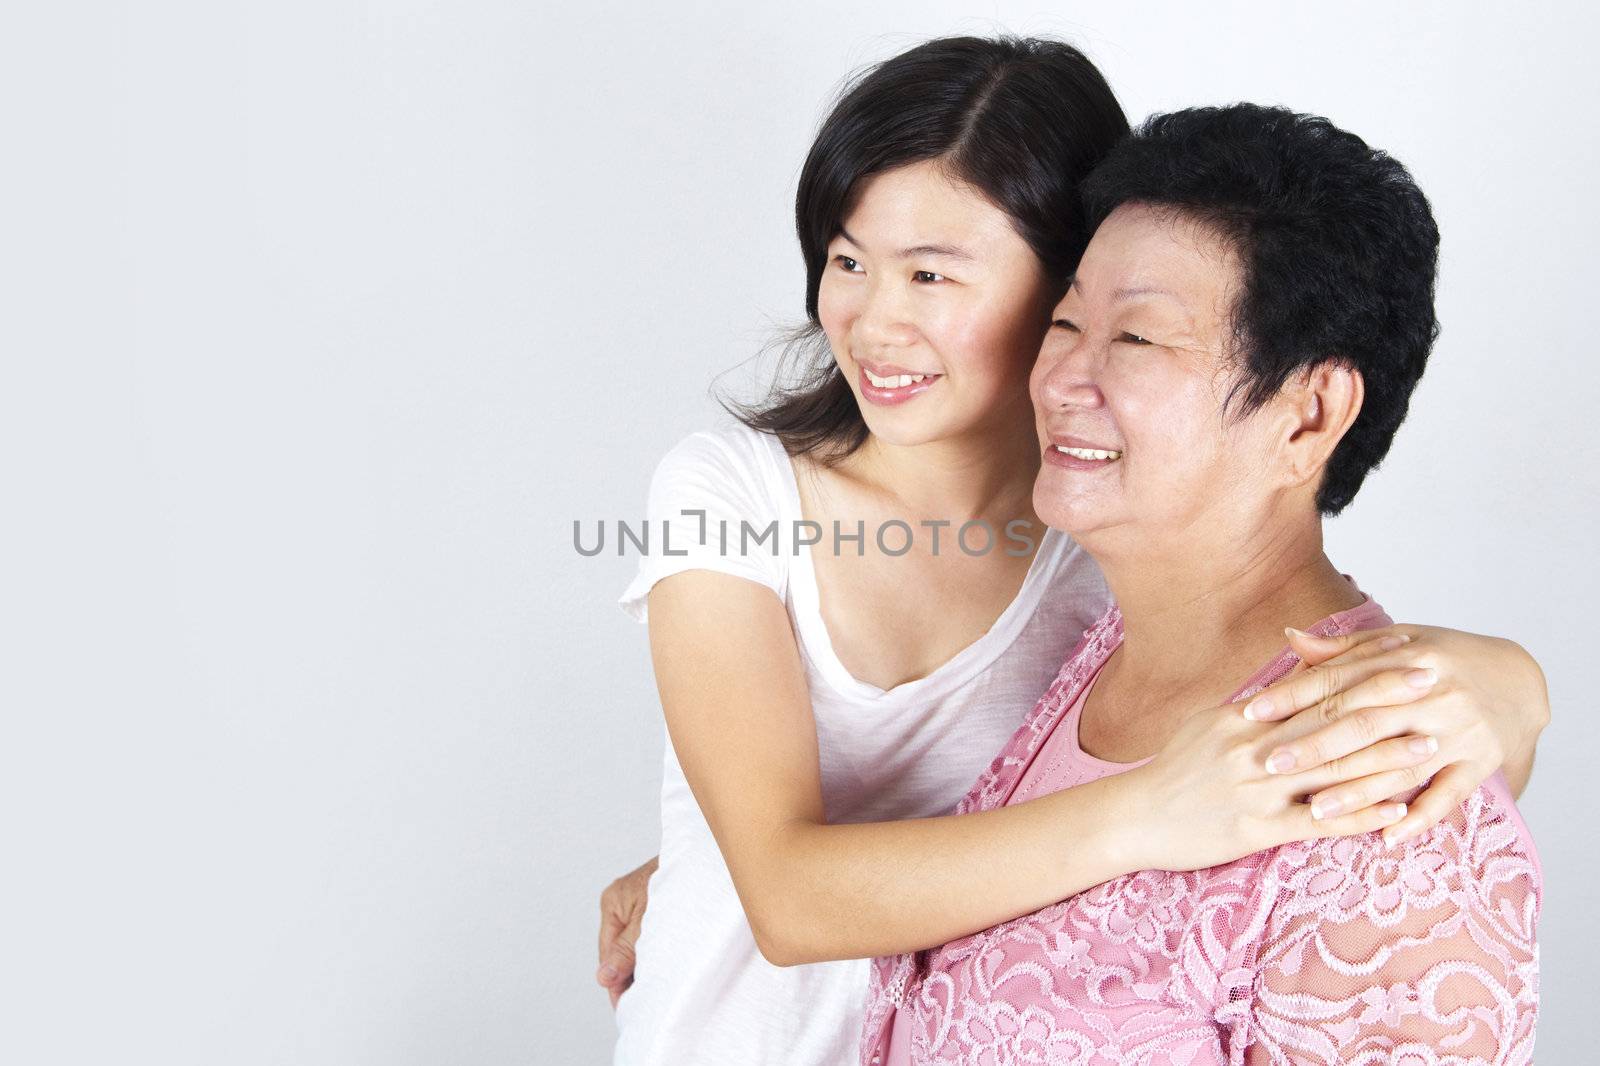 Senior Asian woman and young daughter looking away with smiling, on grey background.